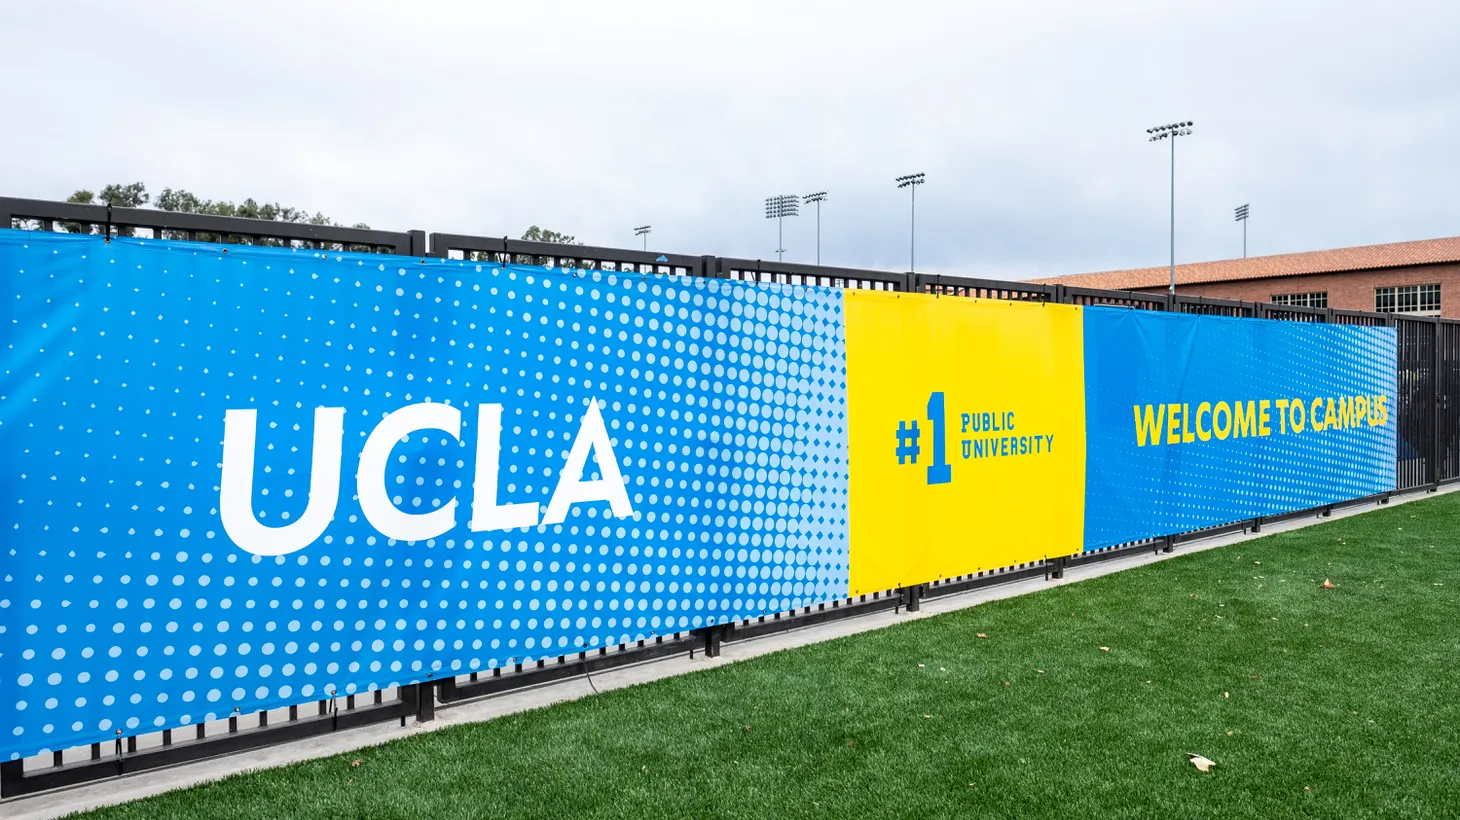 A UCLA sign welcomes people to campus, which it touts as the No. 1 public university.